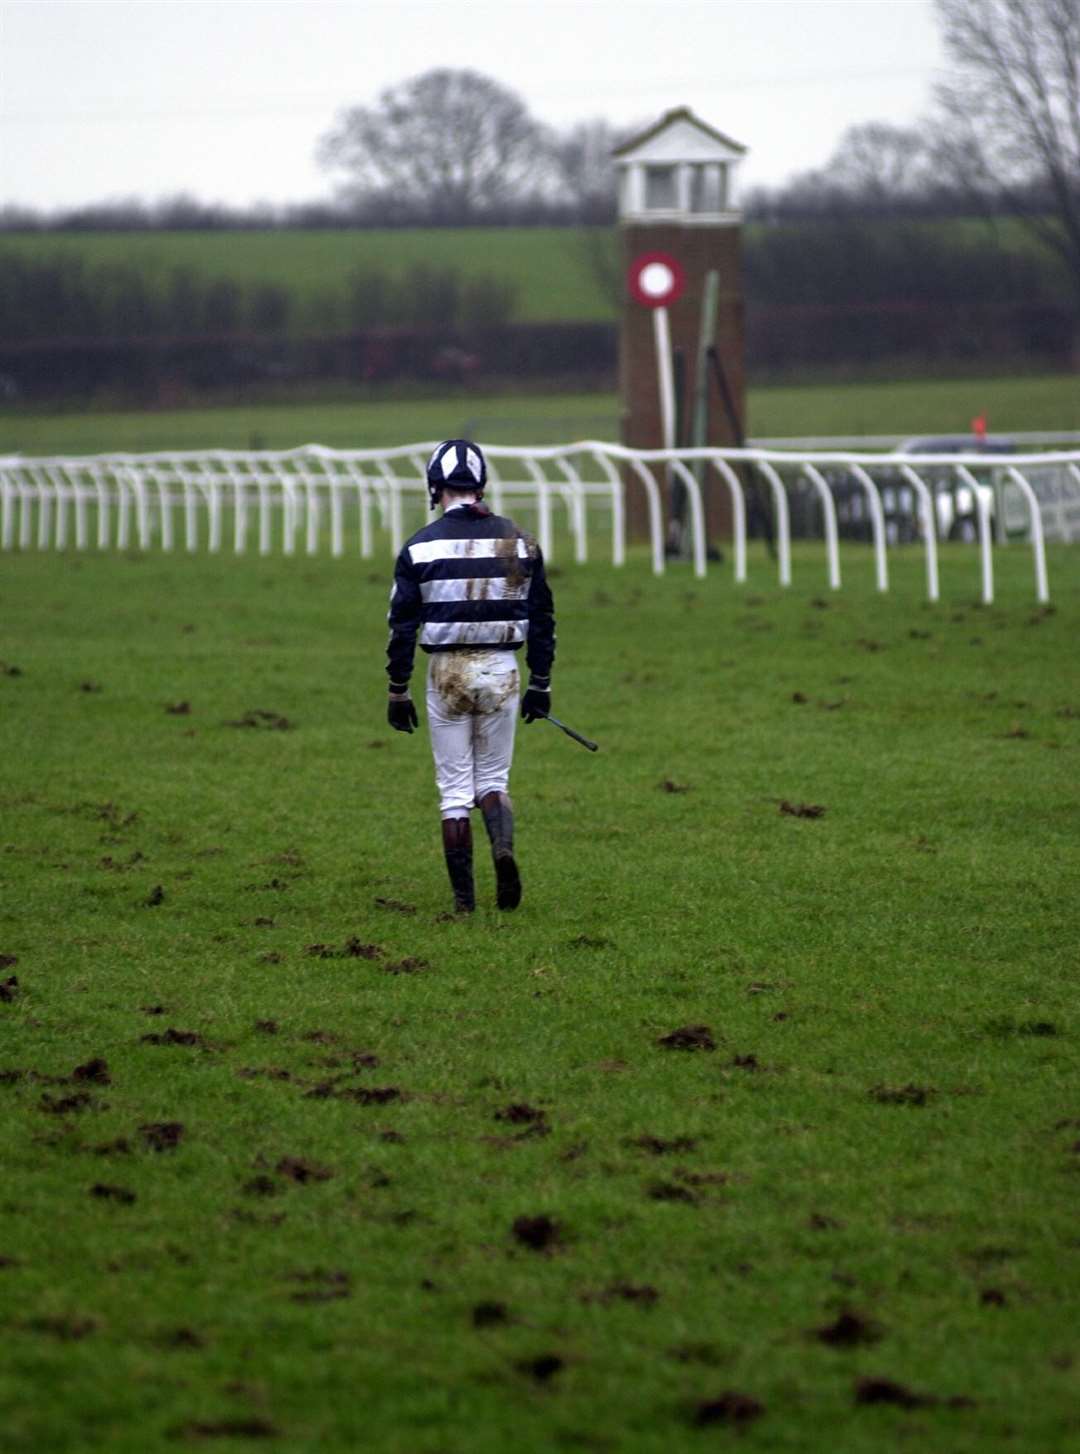 Ten years before the track closed, Jacques Ricou trudges back to the paddock after falling at the final jump in January 2002. Farewell, Folkestone...